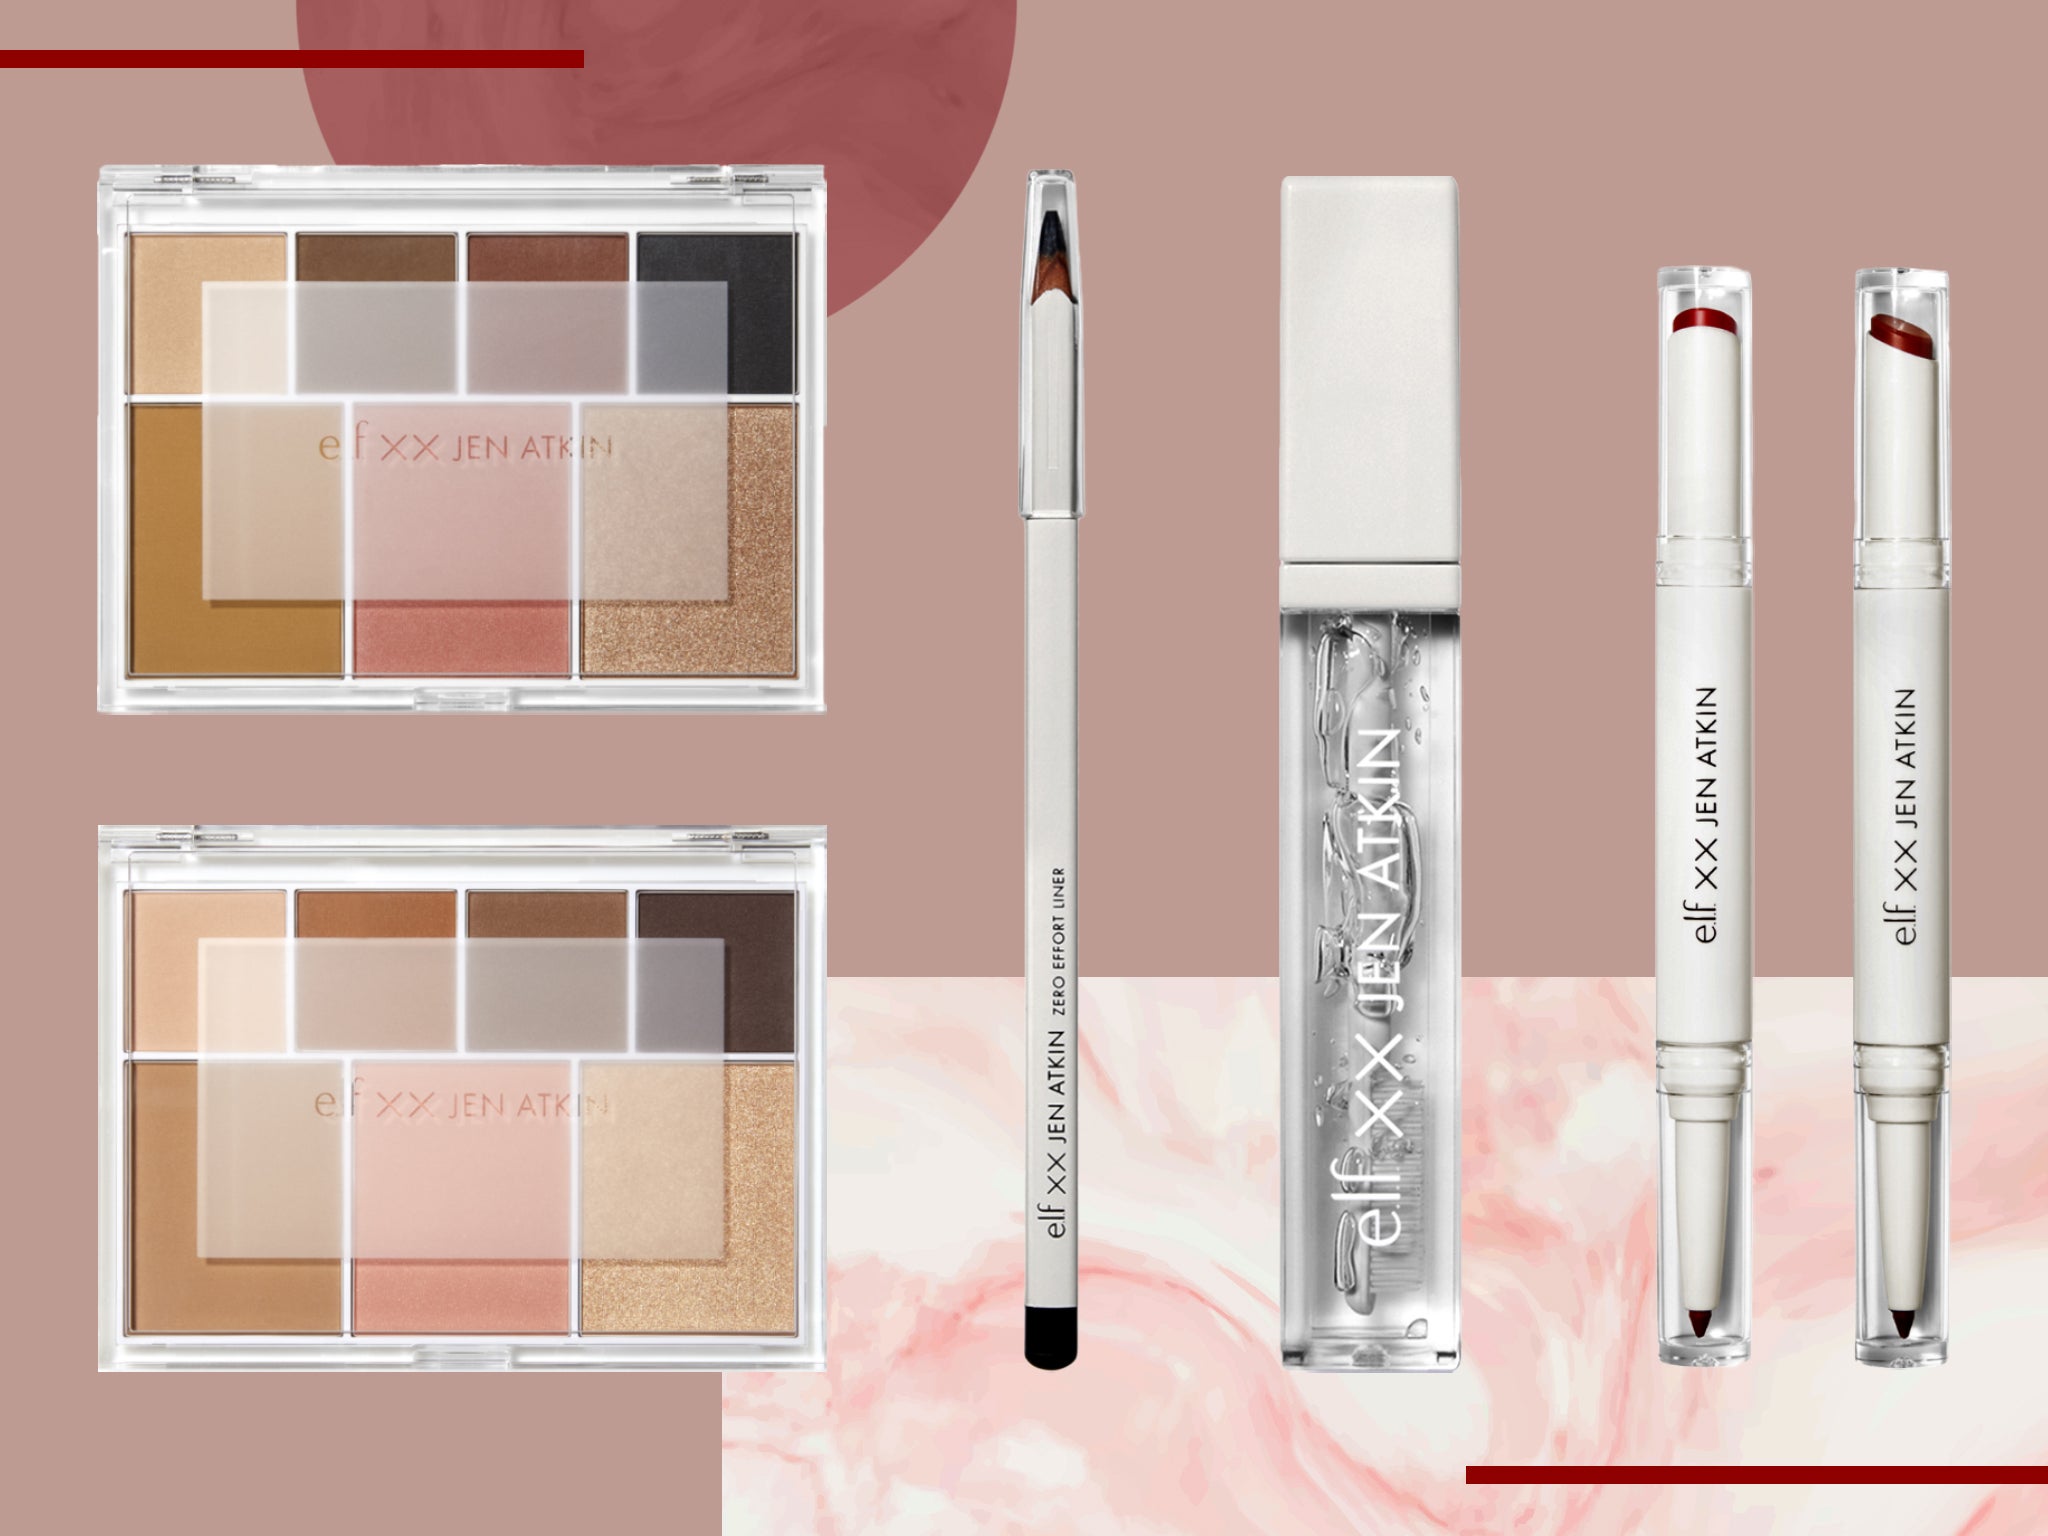 Designed to be modern and multi-purpose, the seven-piece range is available at Boots